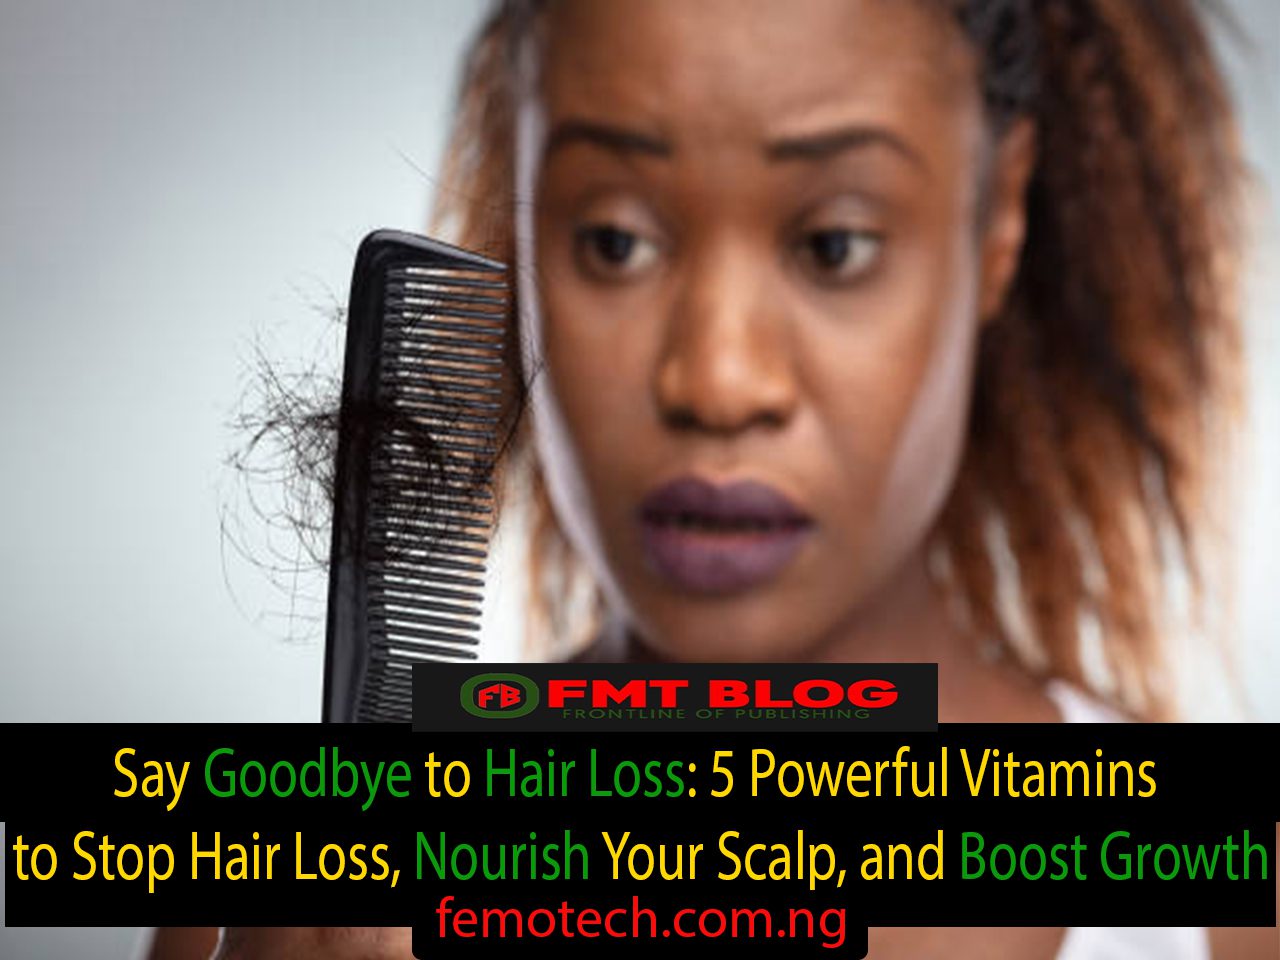 Say Goodbye to Hair Loss: 5 Powerful Vitamins to Stop Hair Loss, Nourish Your Scalp, and Boost Growth